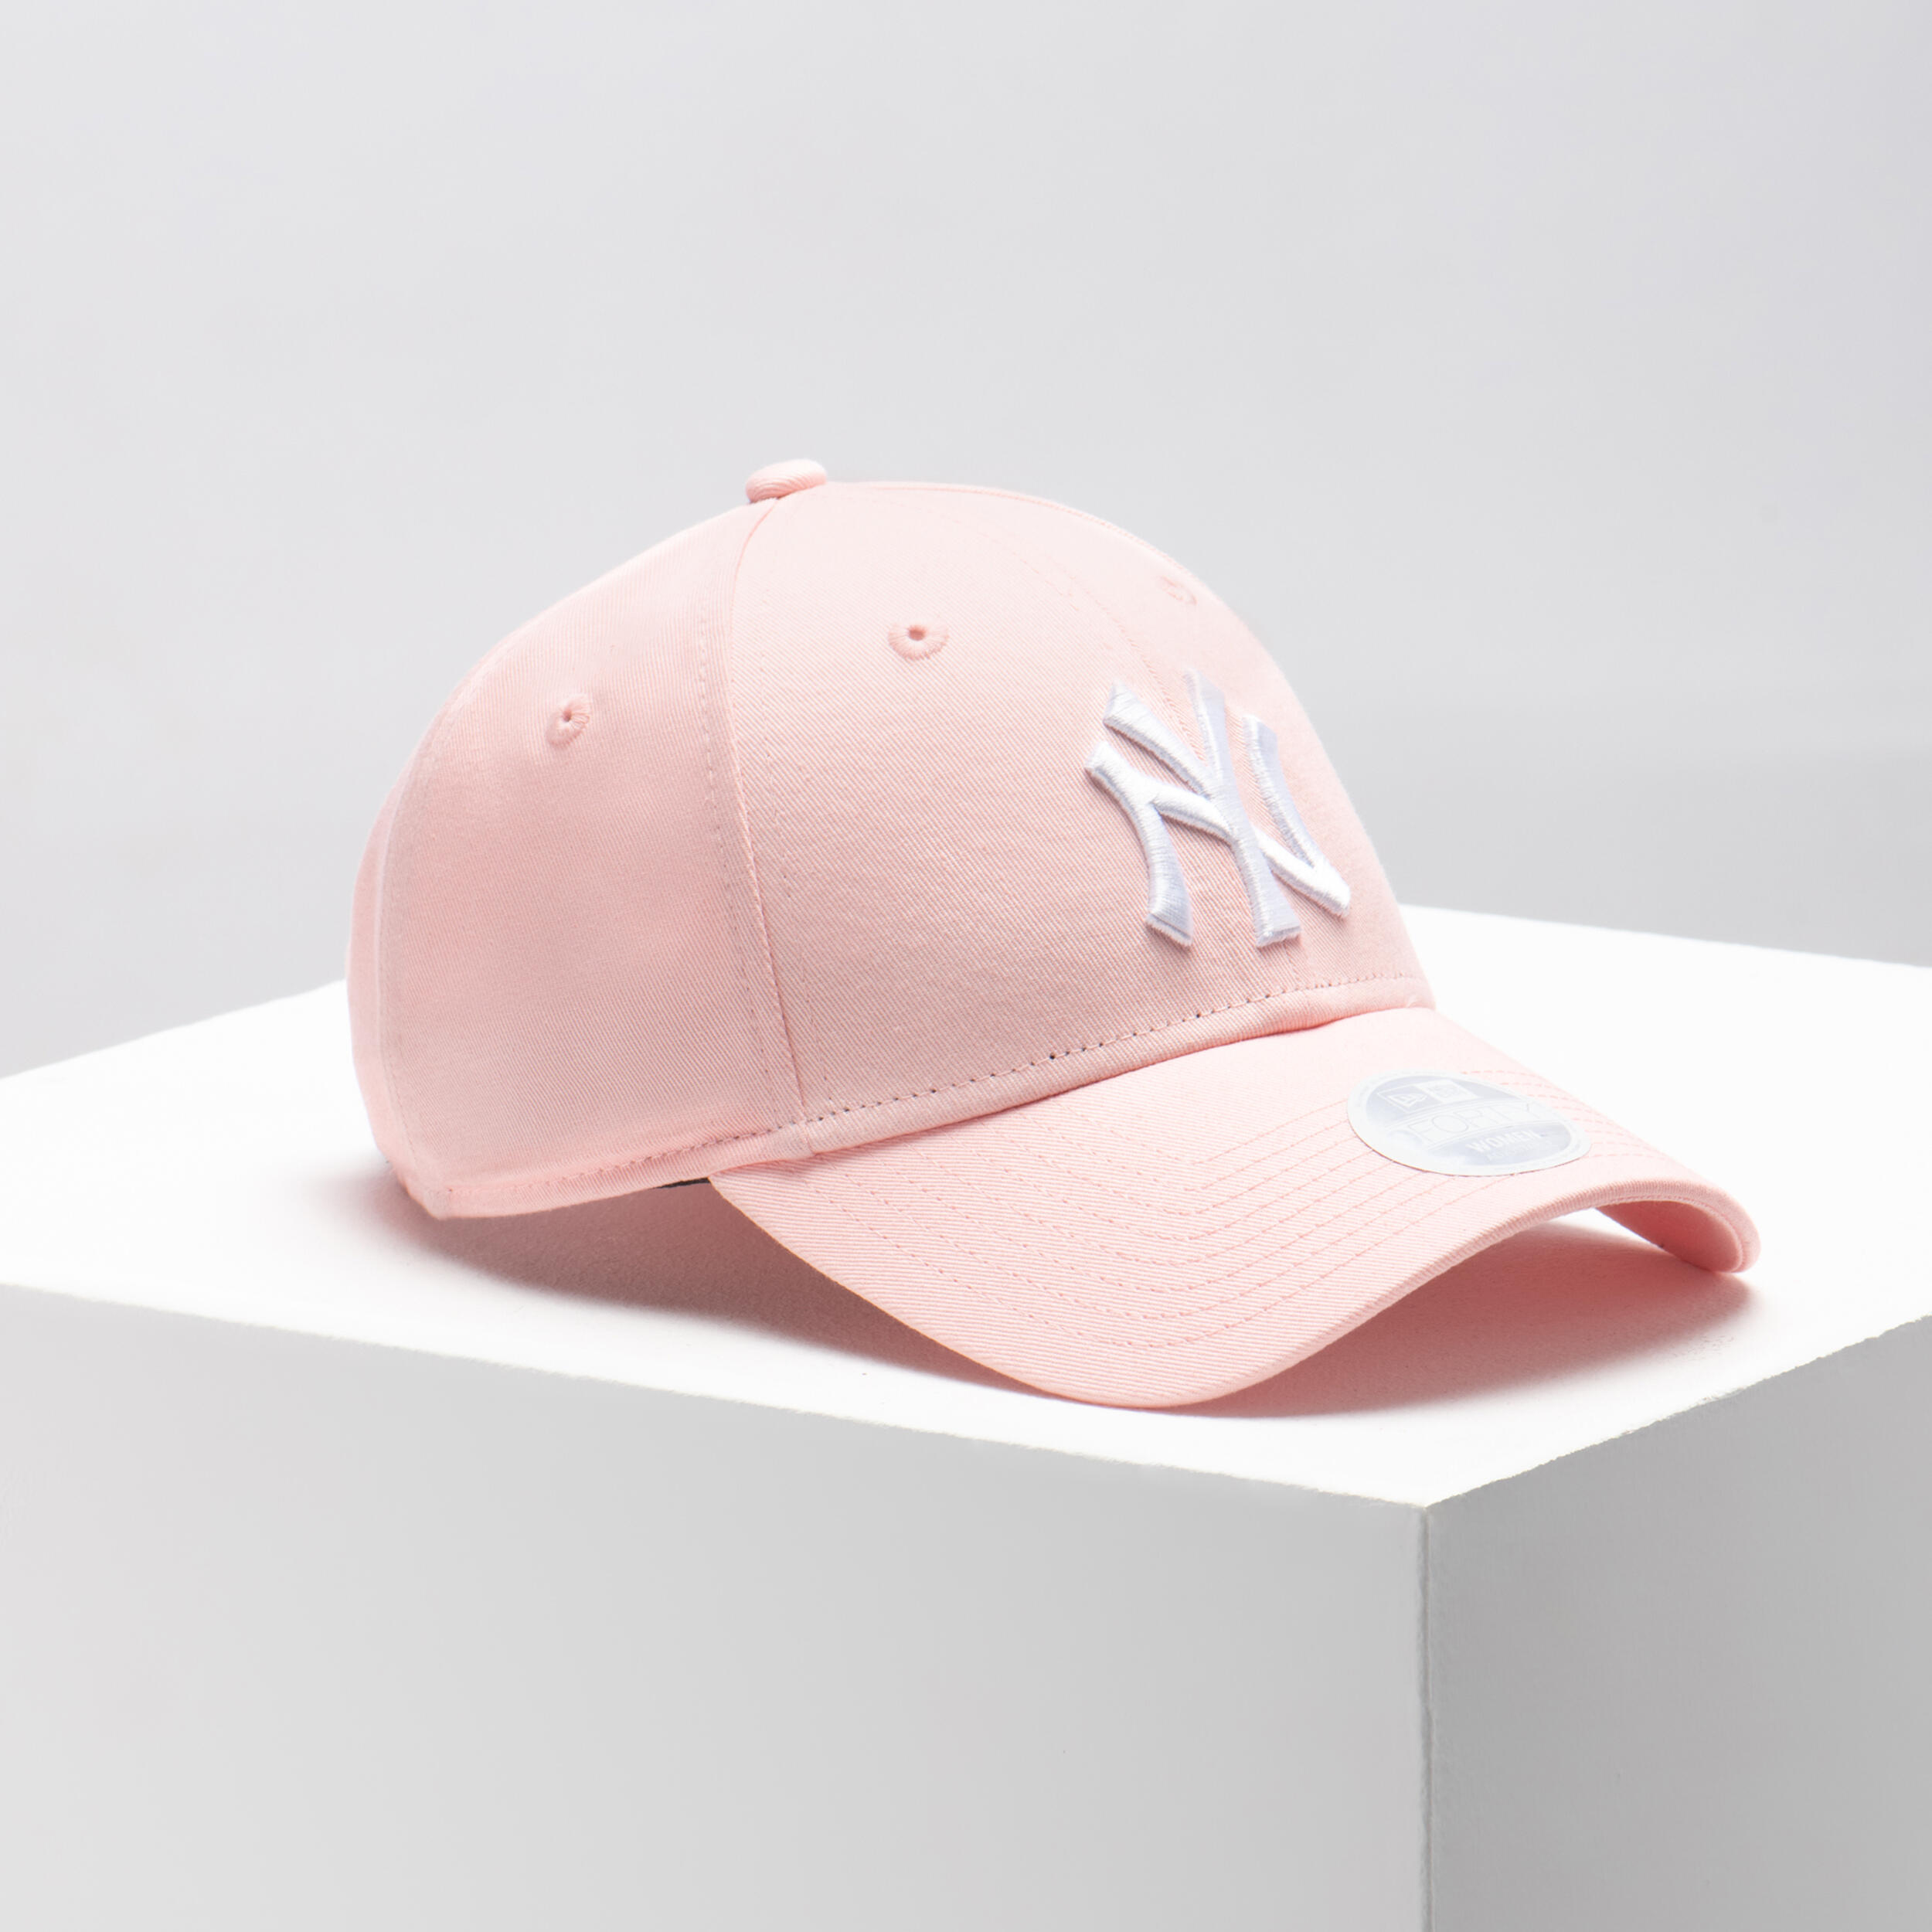 MLB pink cap Mens Fashion Watches  Accessories Caps  Hats on Carousell